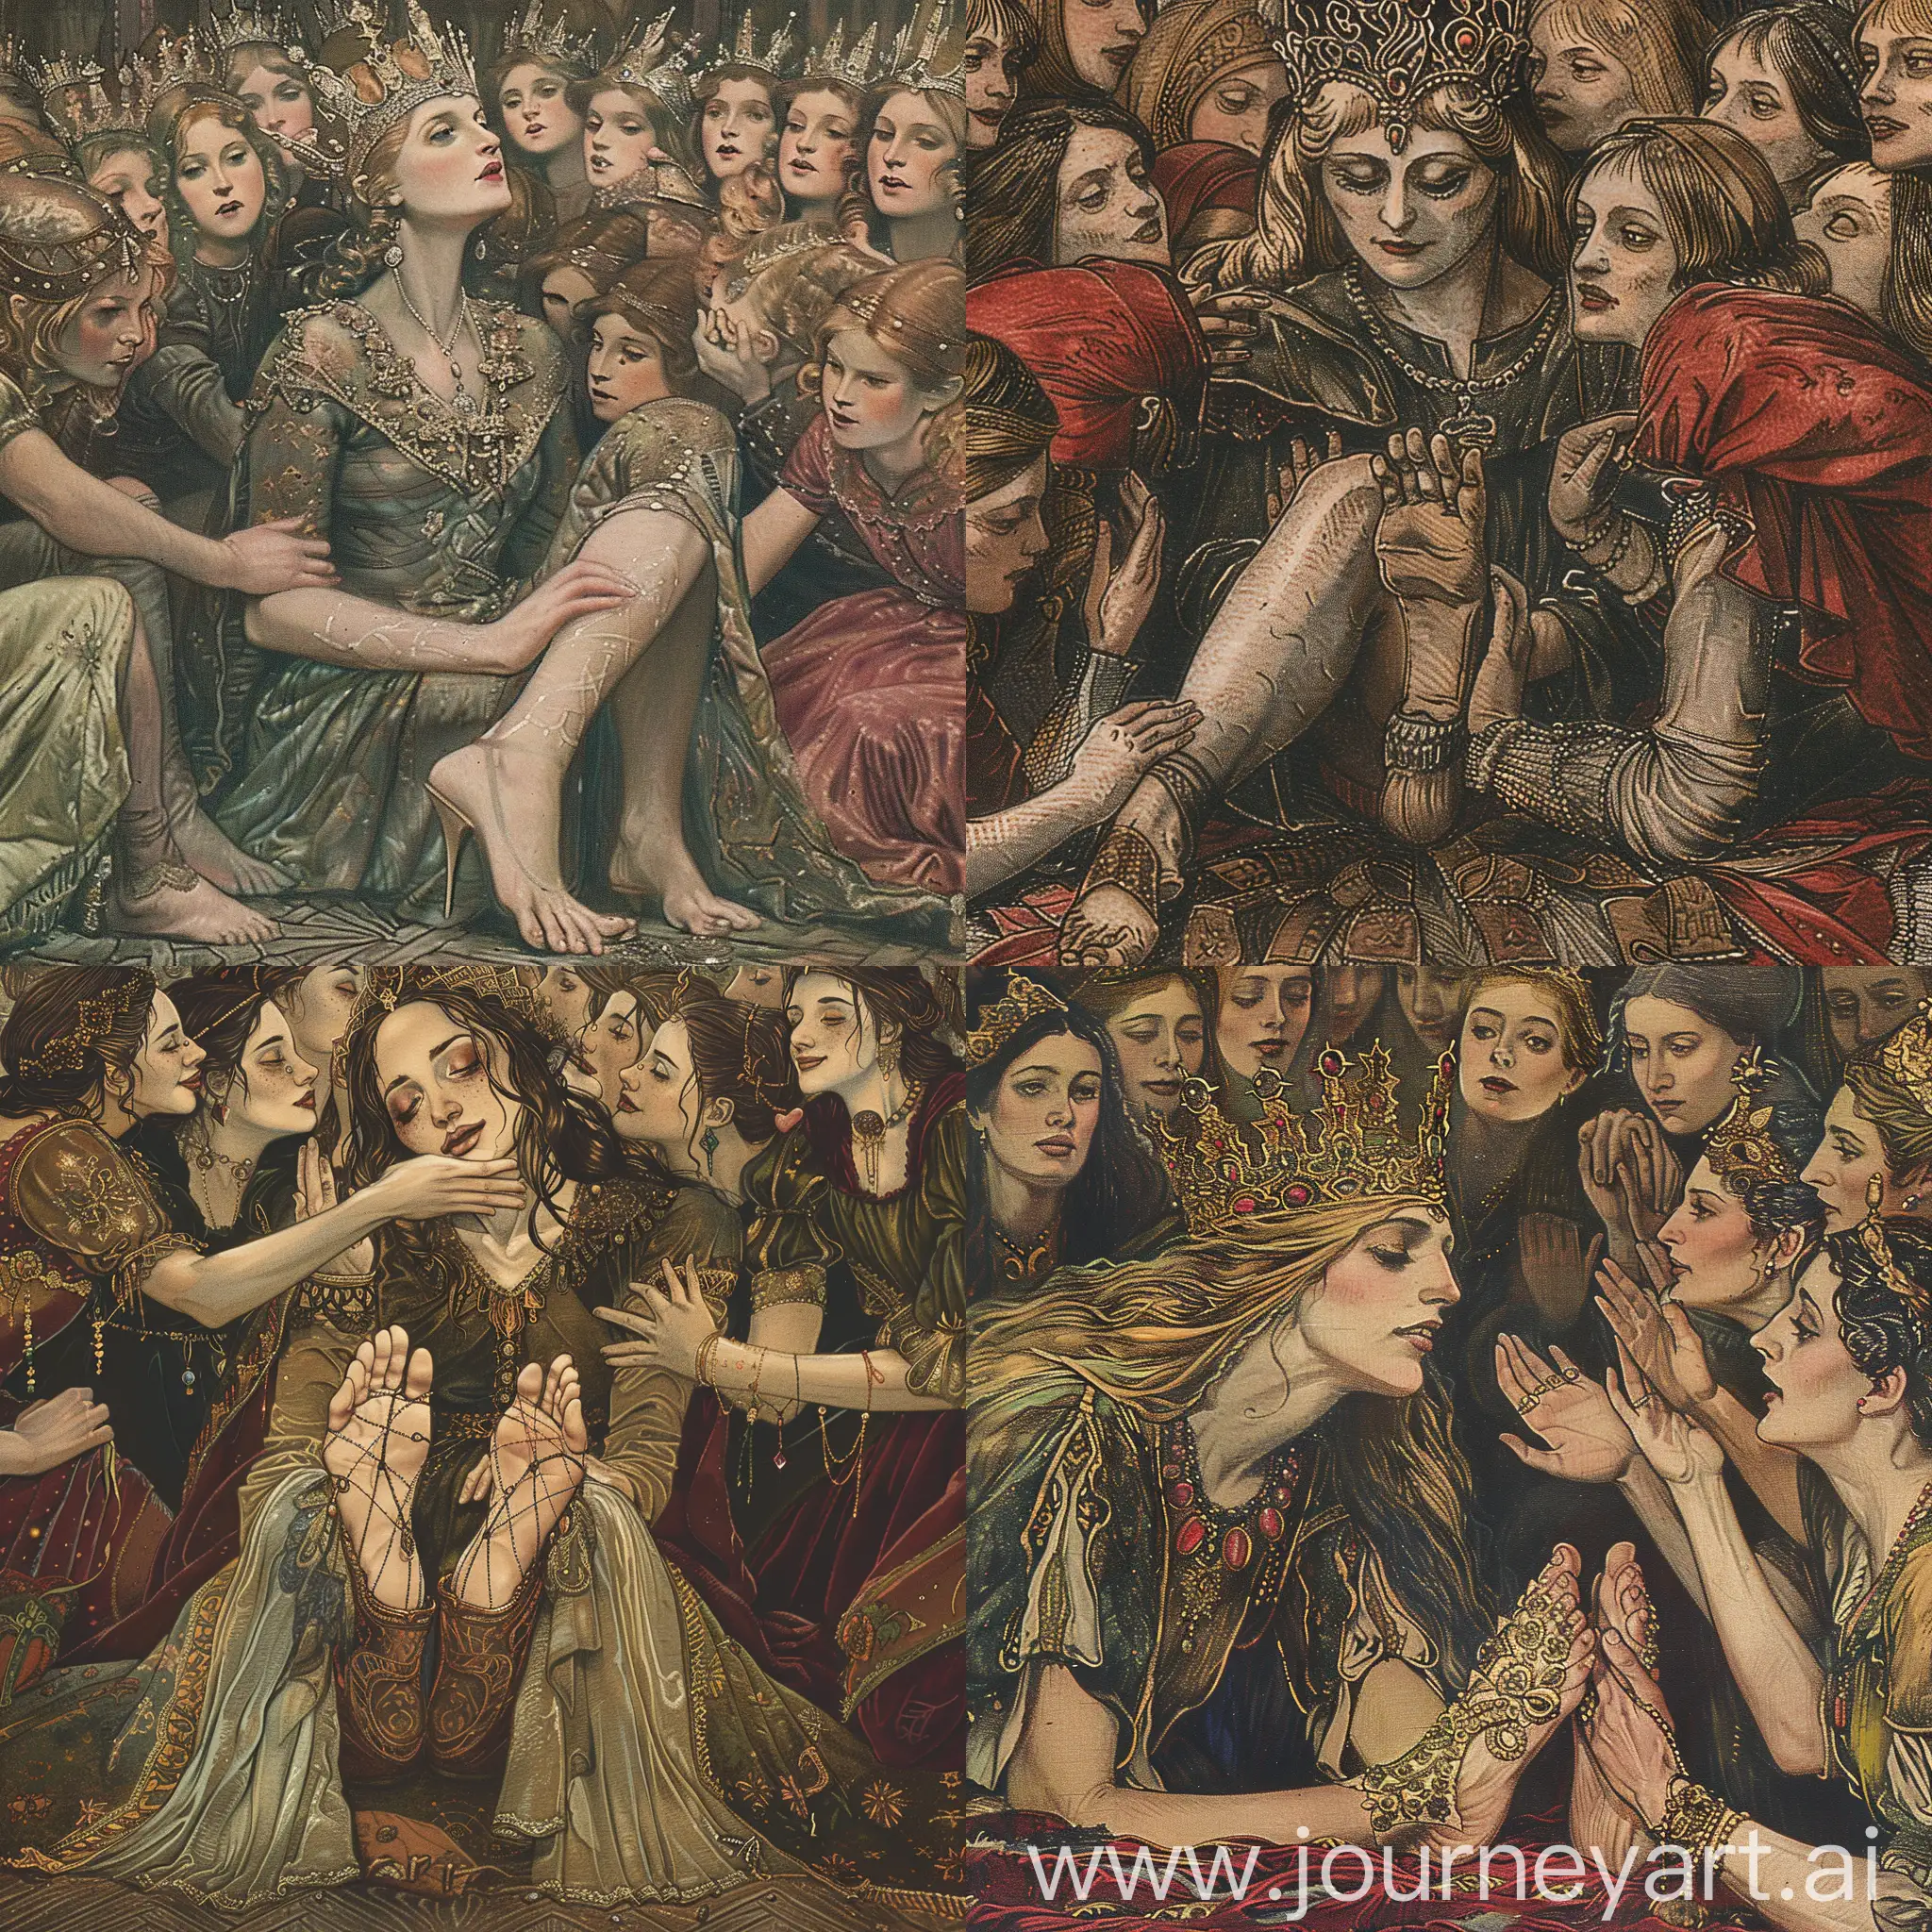 Medieval artstyle, evil queen who's feet are being kissed by a crowd of women